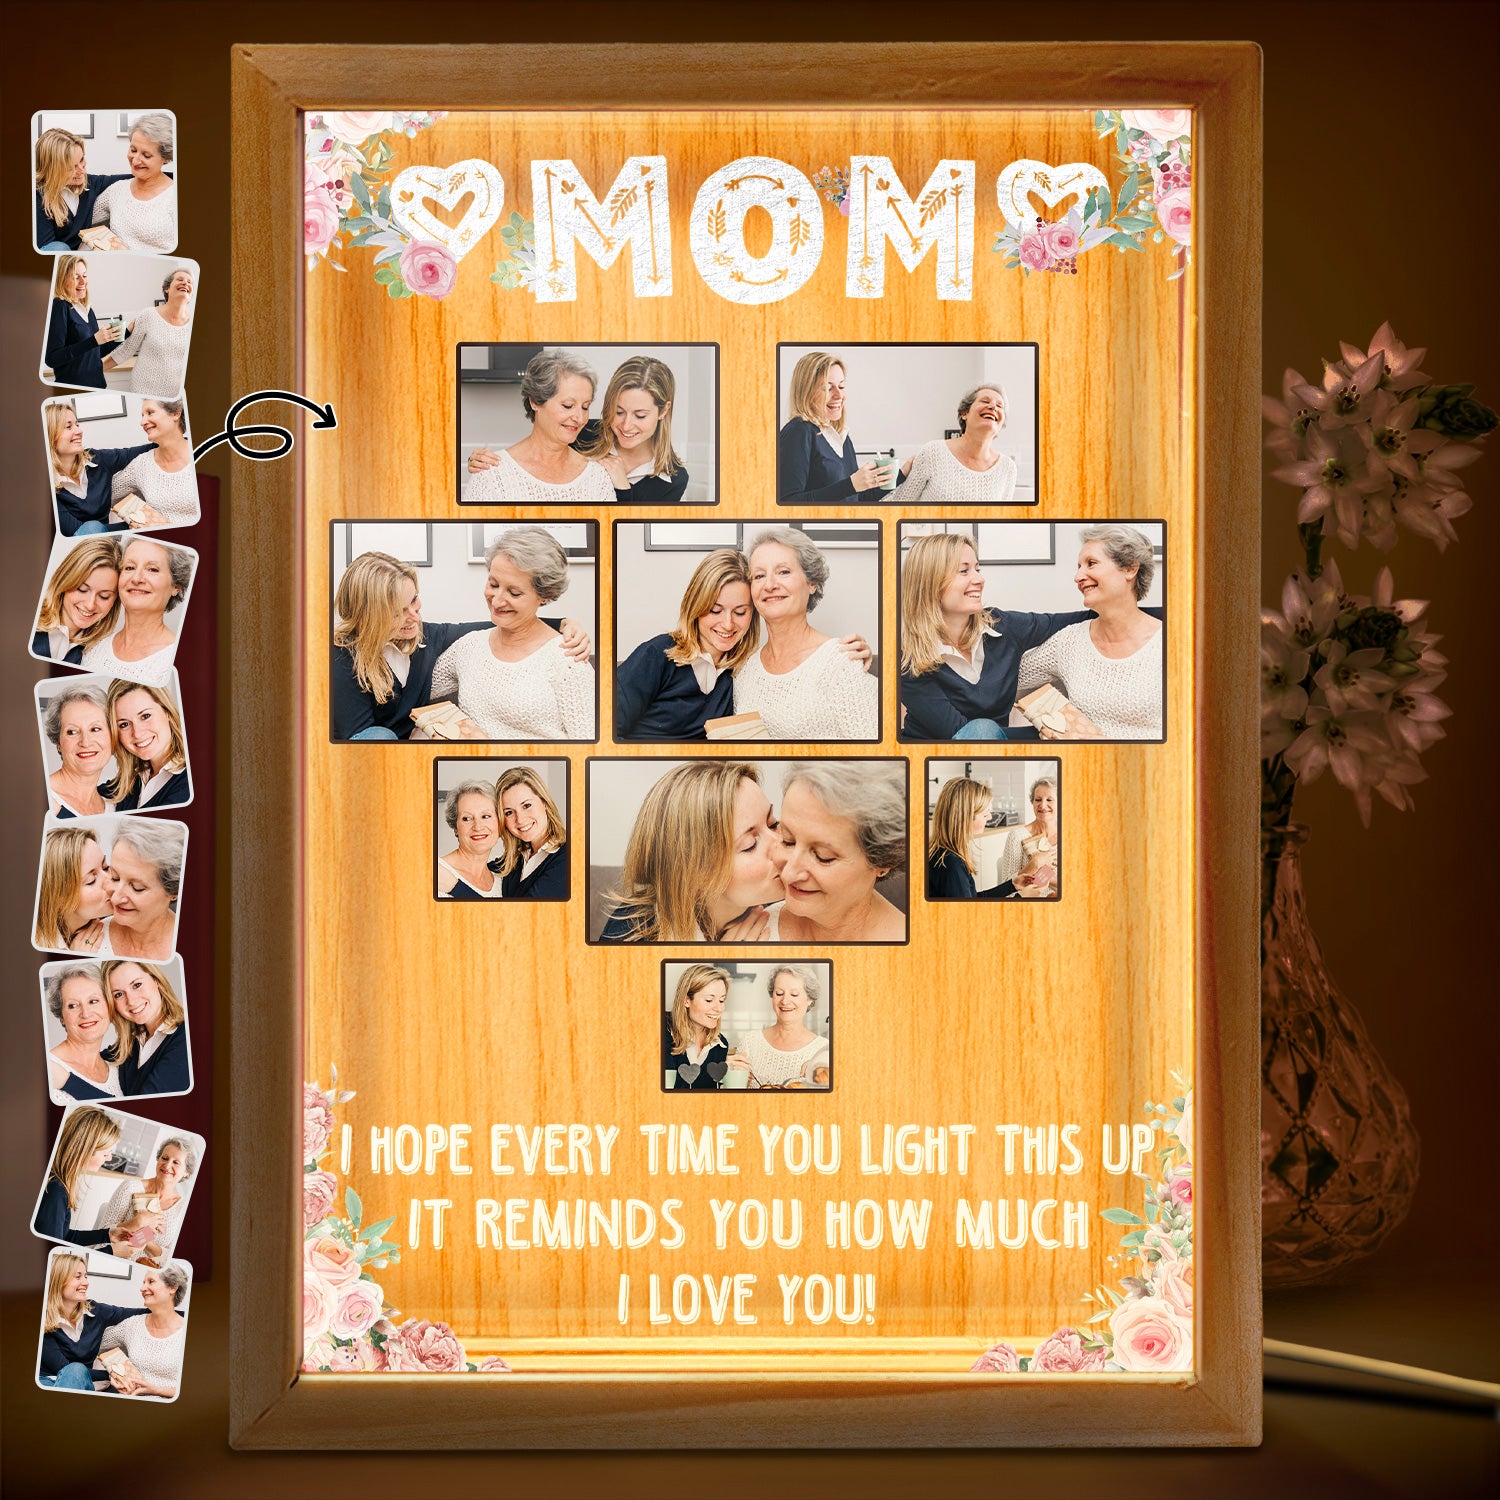 Custom Photo We Hope Every Time You Light This Up - Birthday, Loving Gift For Mom, Mother, Grandma, Grandmother - Personalized Picture Frame Light Box